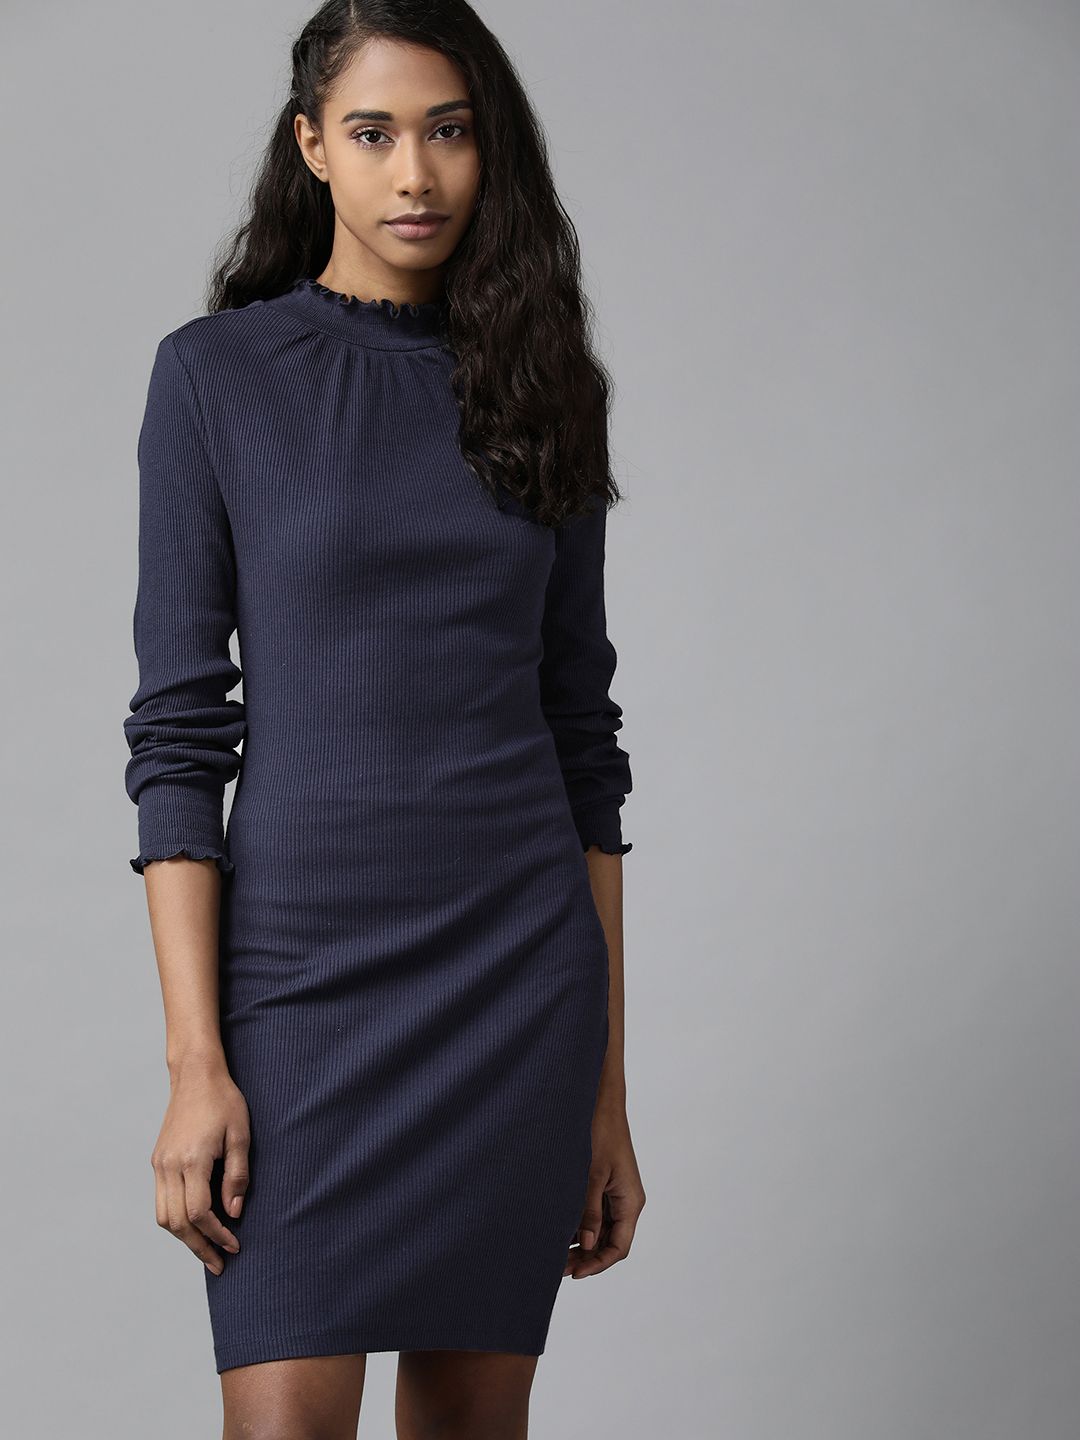 Roadster Women Navy Blue Solid Ribbed Sheath Dress Price in India